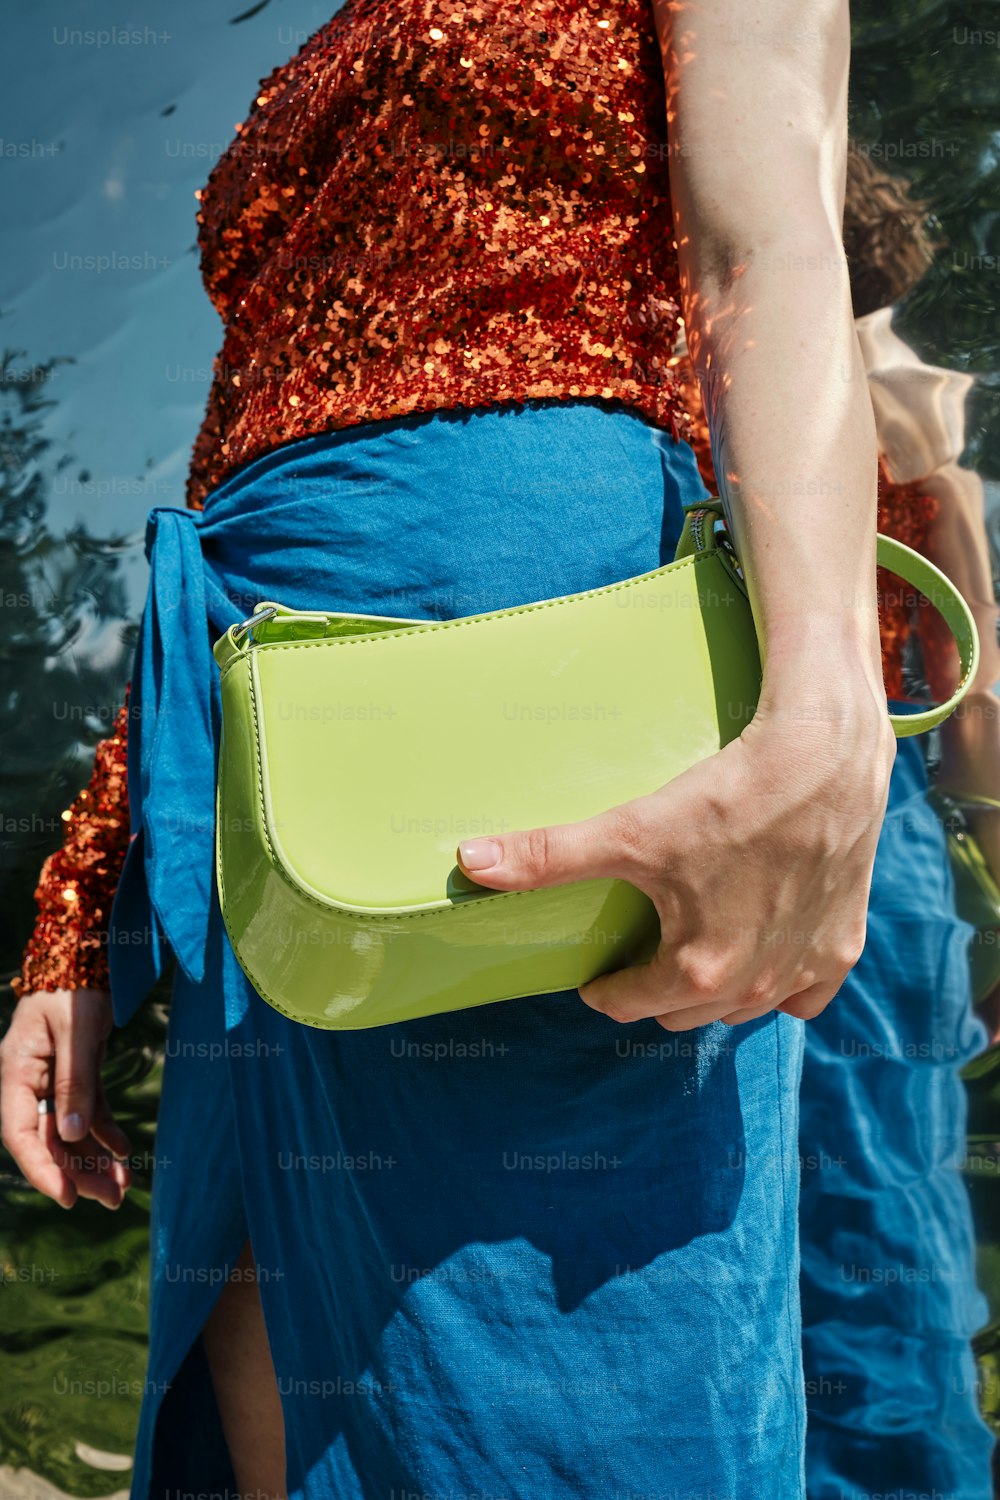 a woman in a blue dress holding a green purse